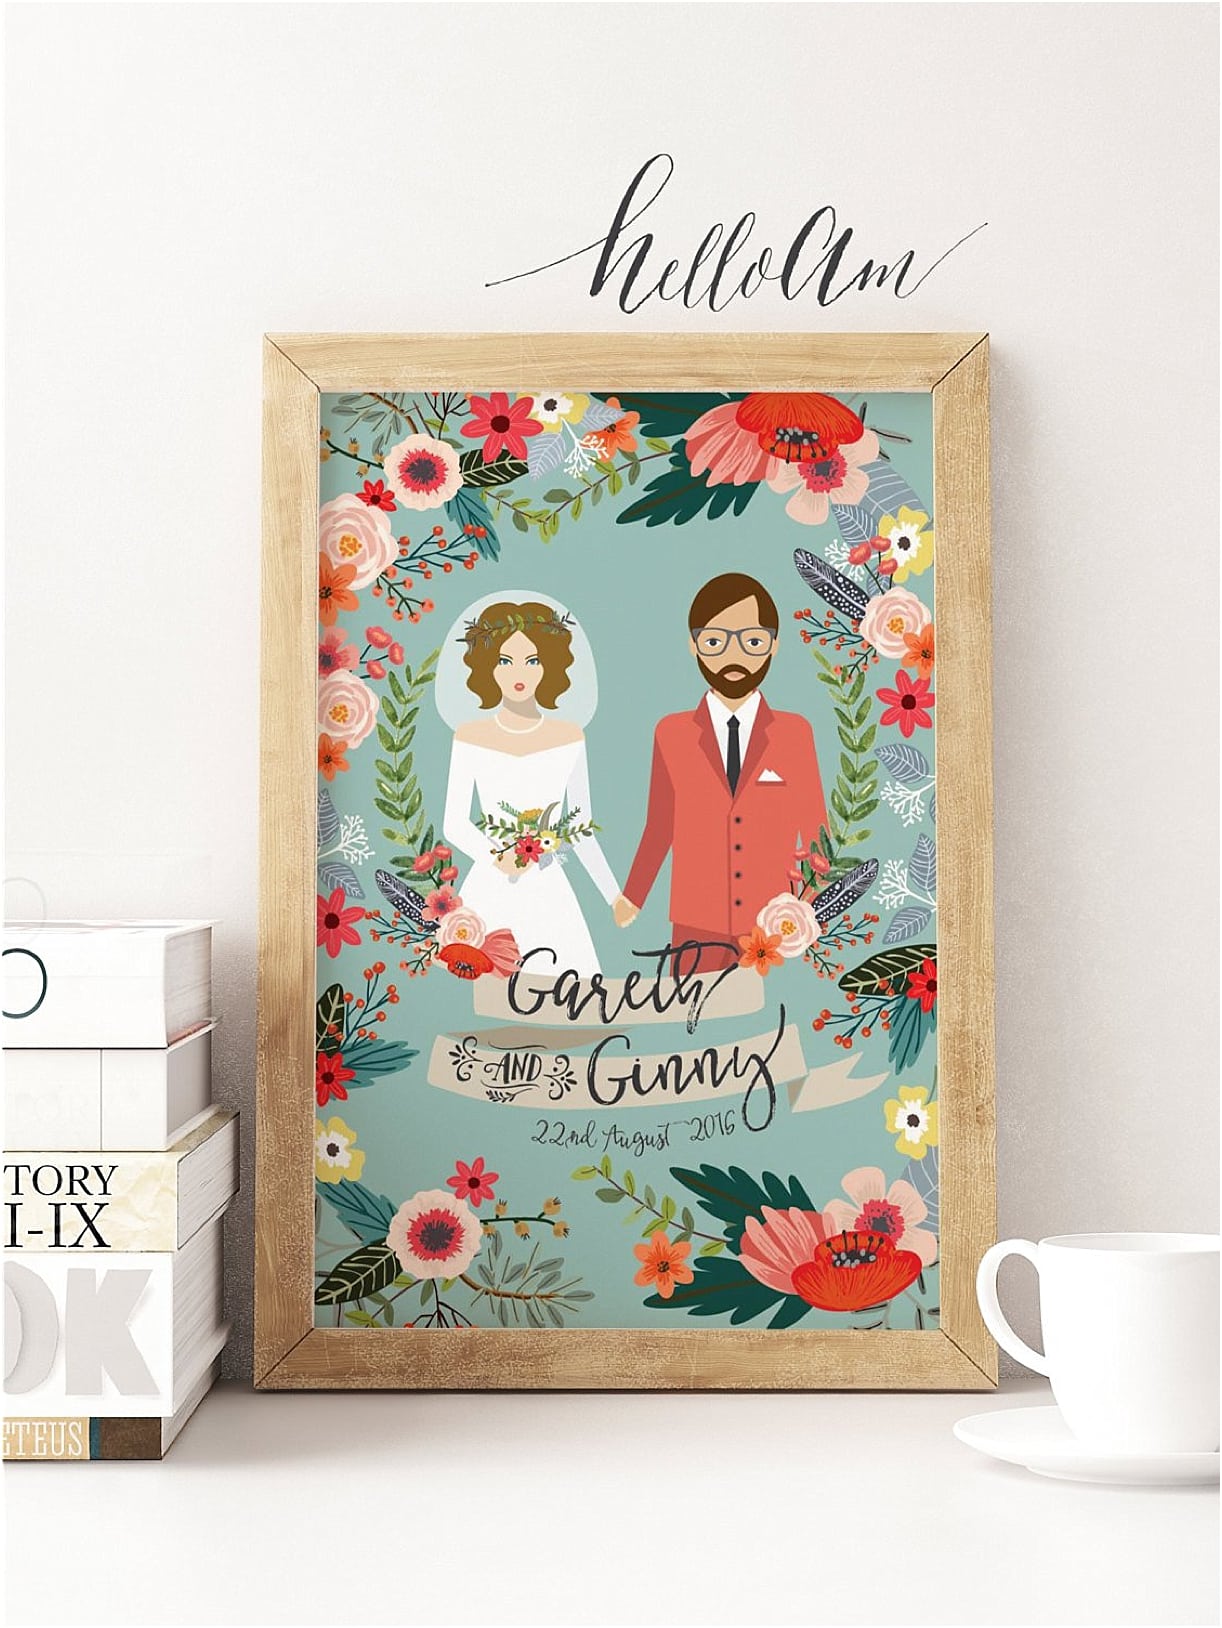 Personalized Gift Ideas for Newlyweds Couples | Hill City Bride Virginia Wedding Blog Floral Print Digital Groom